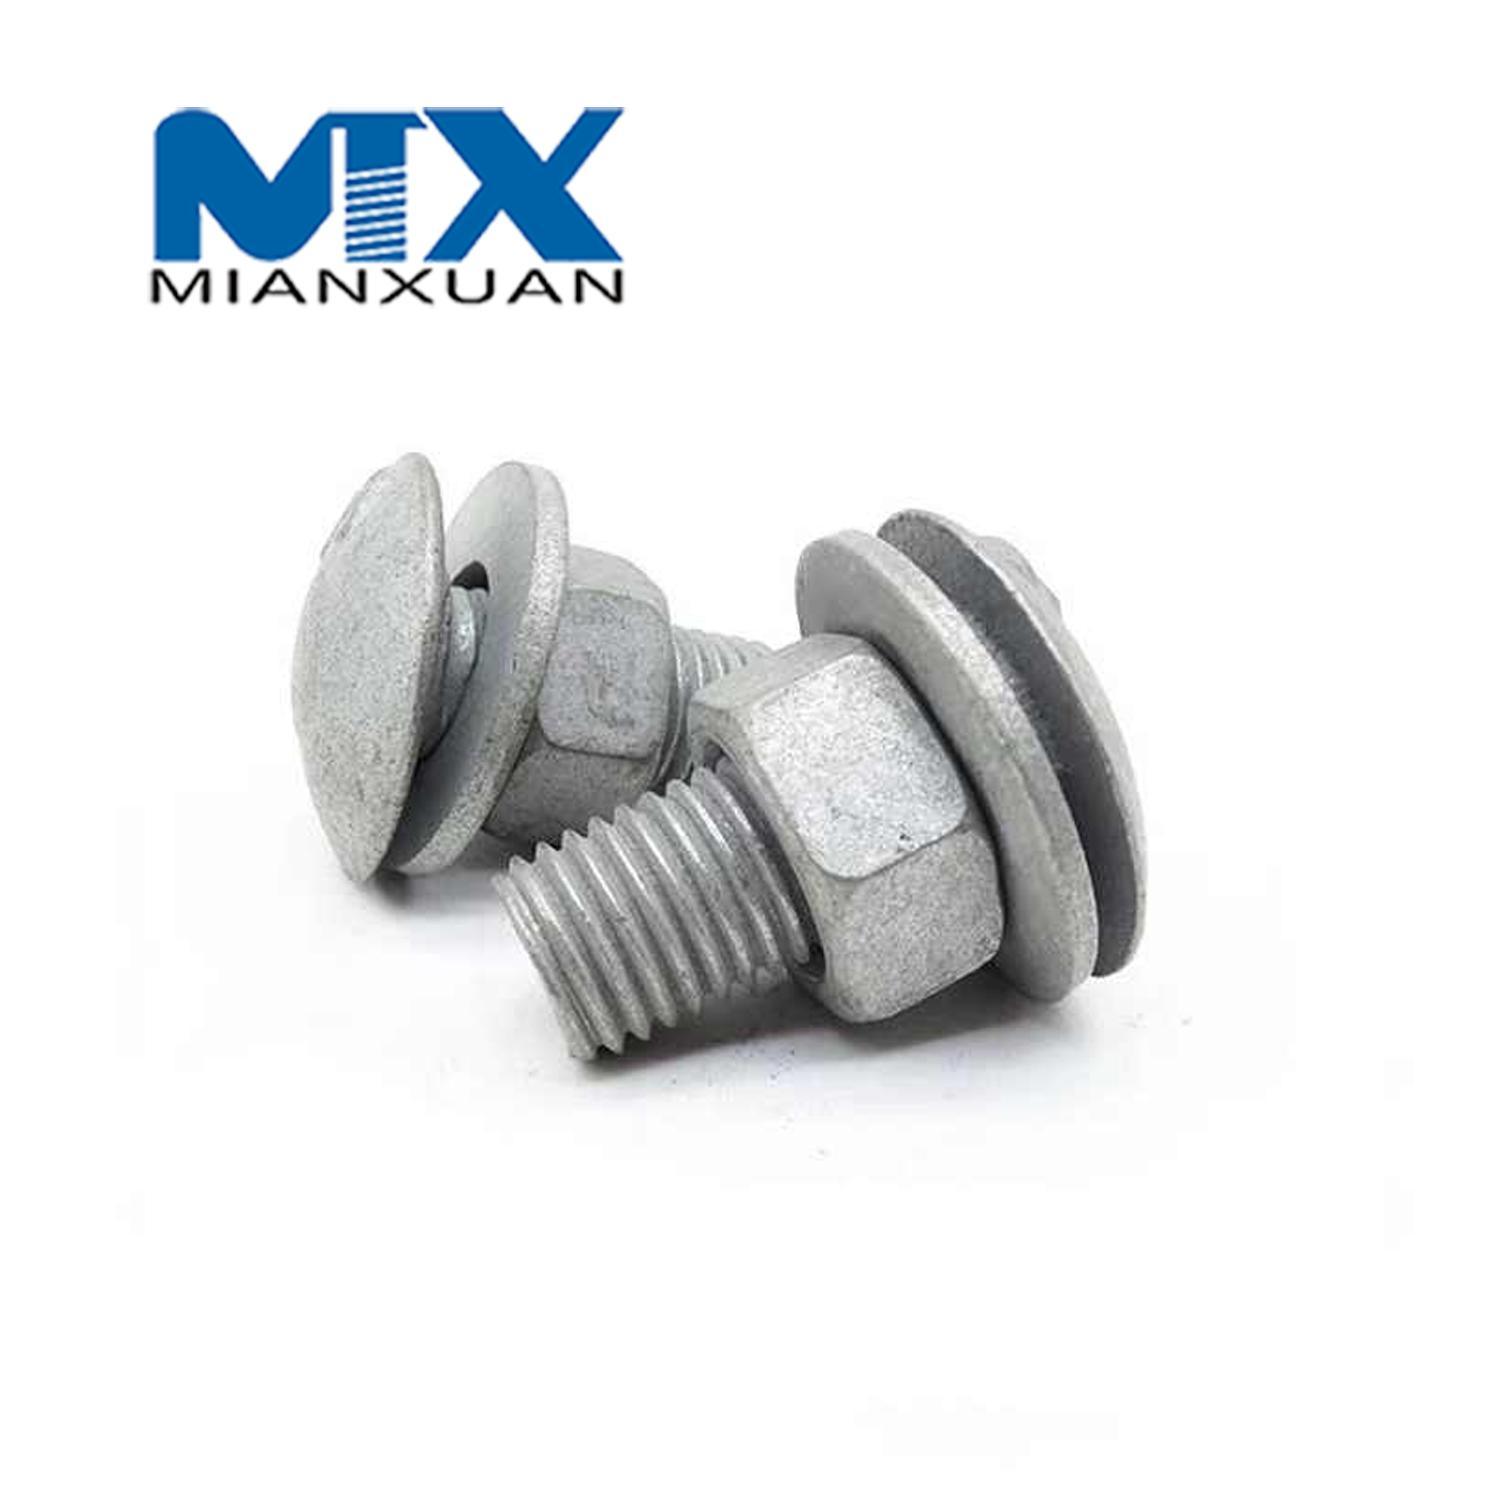 Anti-Corrosion Bolt with Hot-DIP Galvanizing